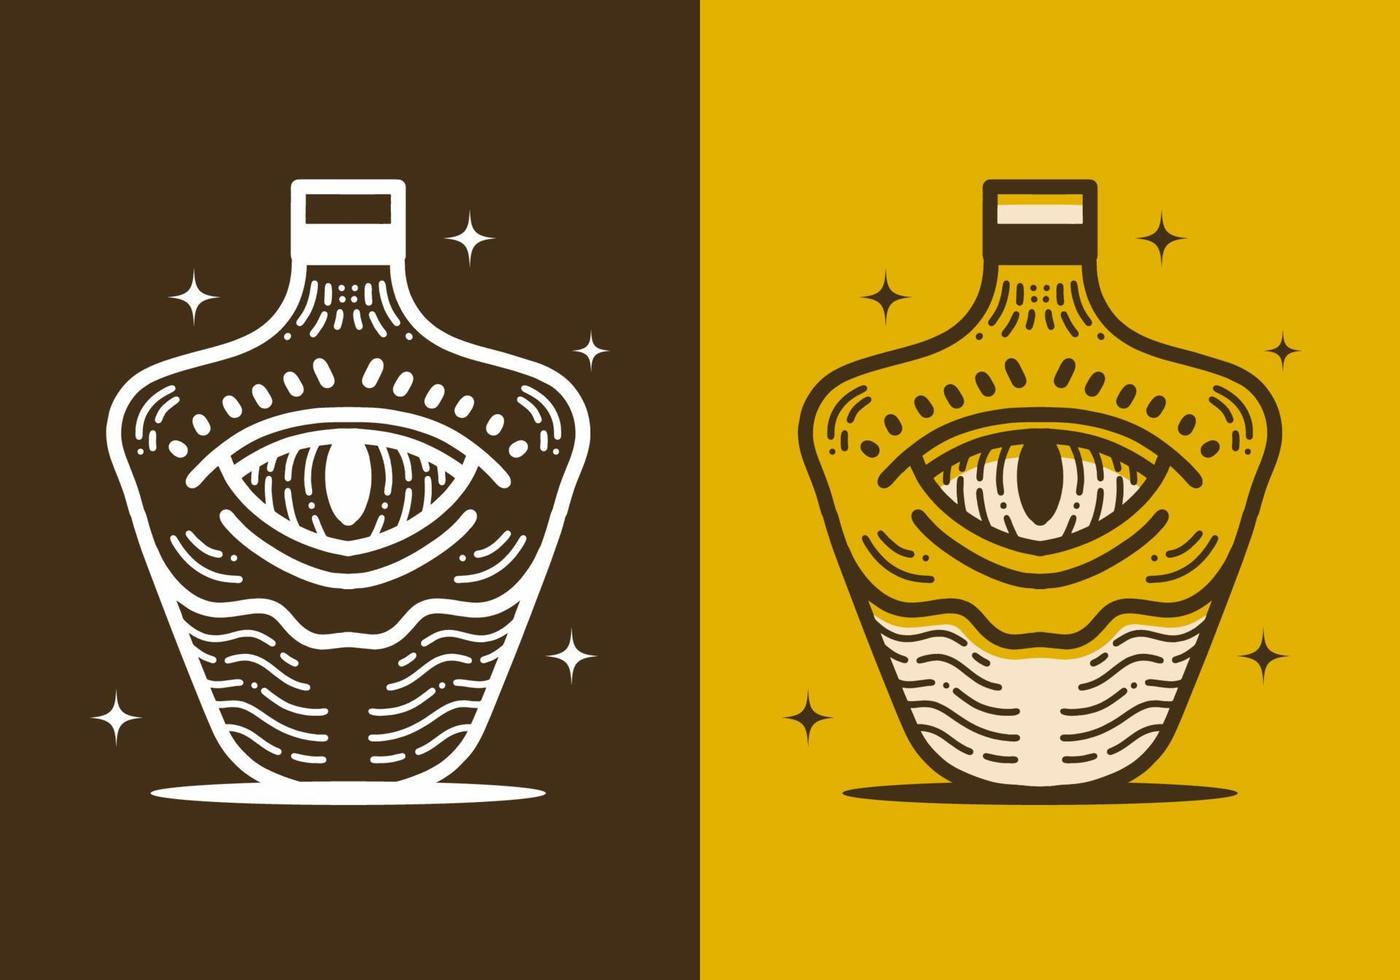 Retro line art design of a glass bottle and one eye vector